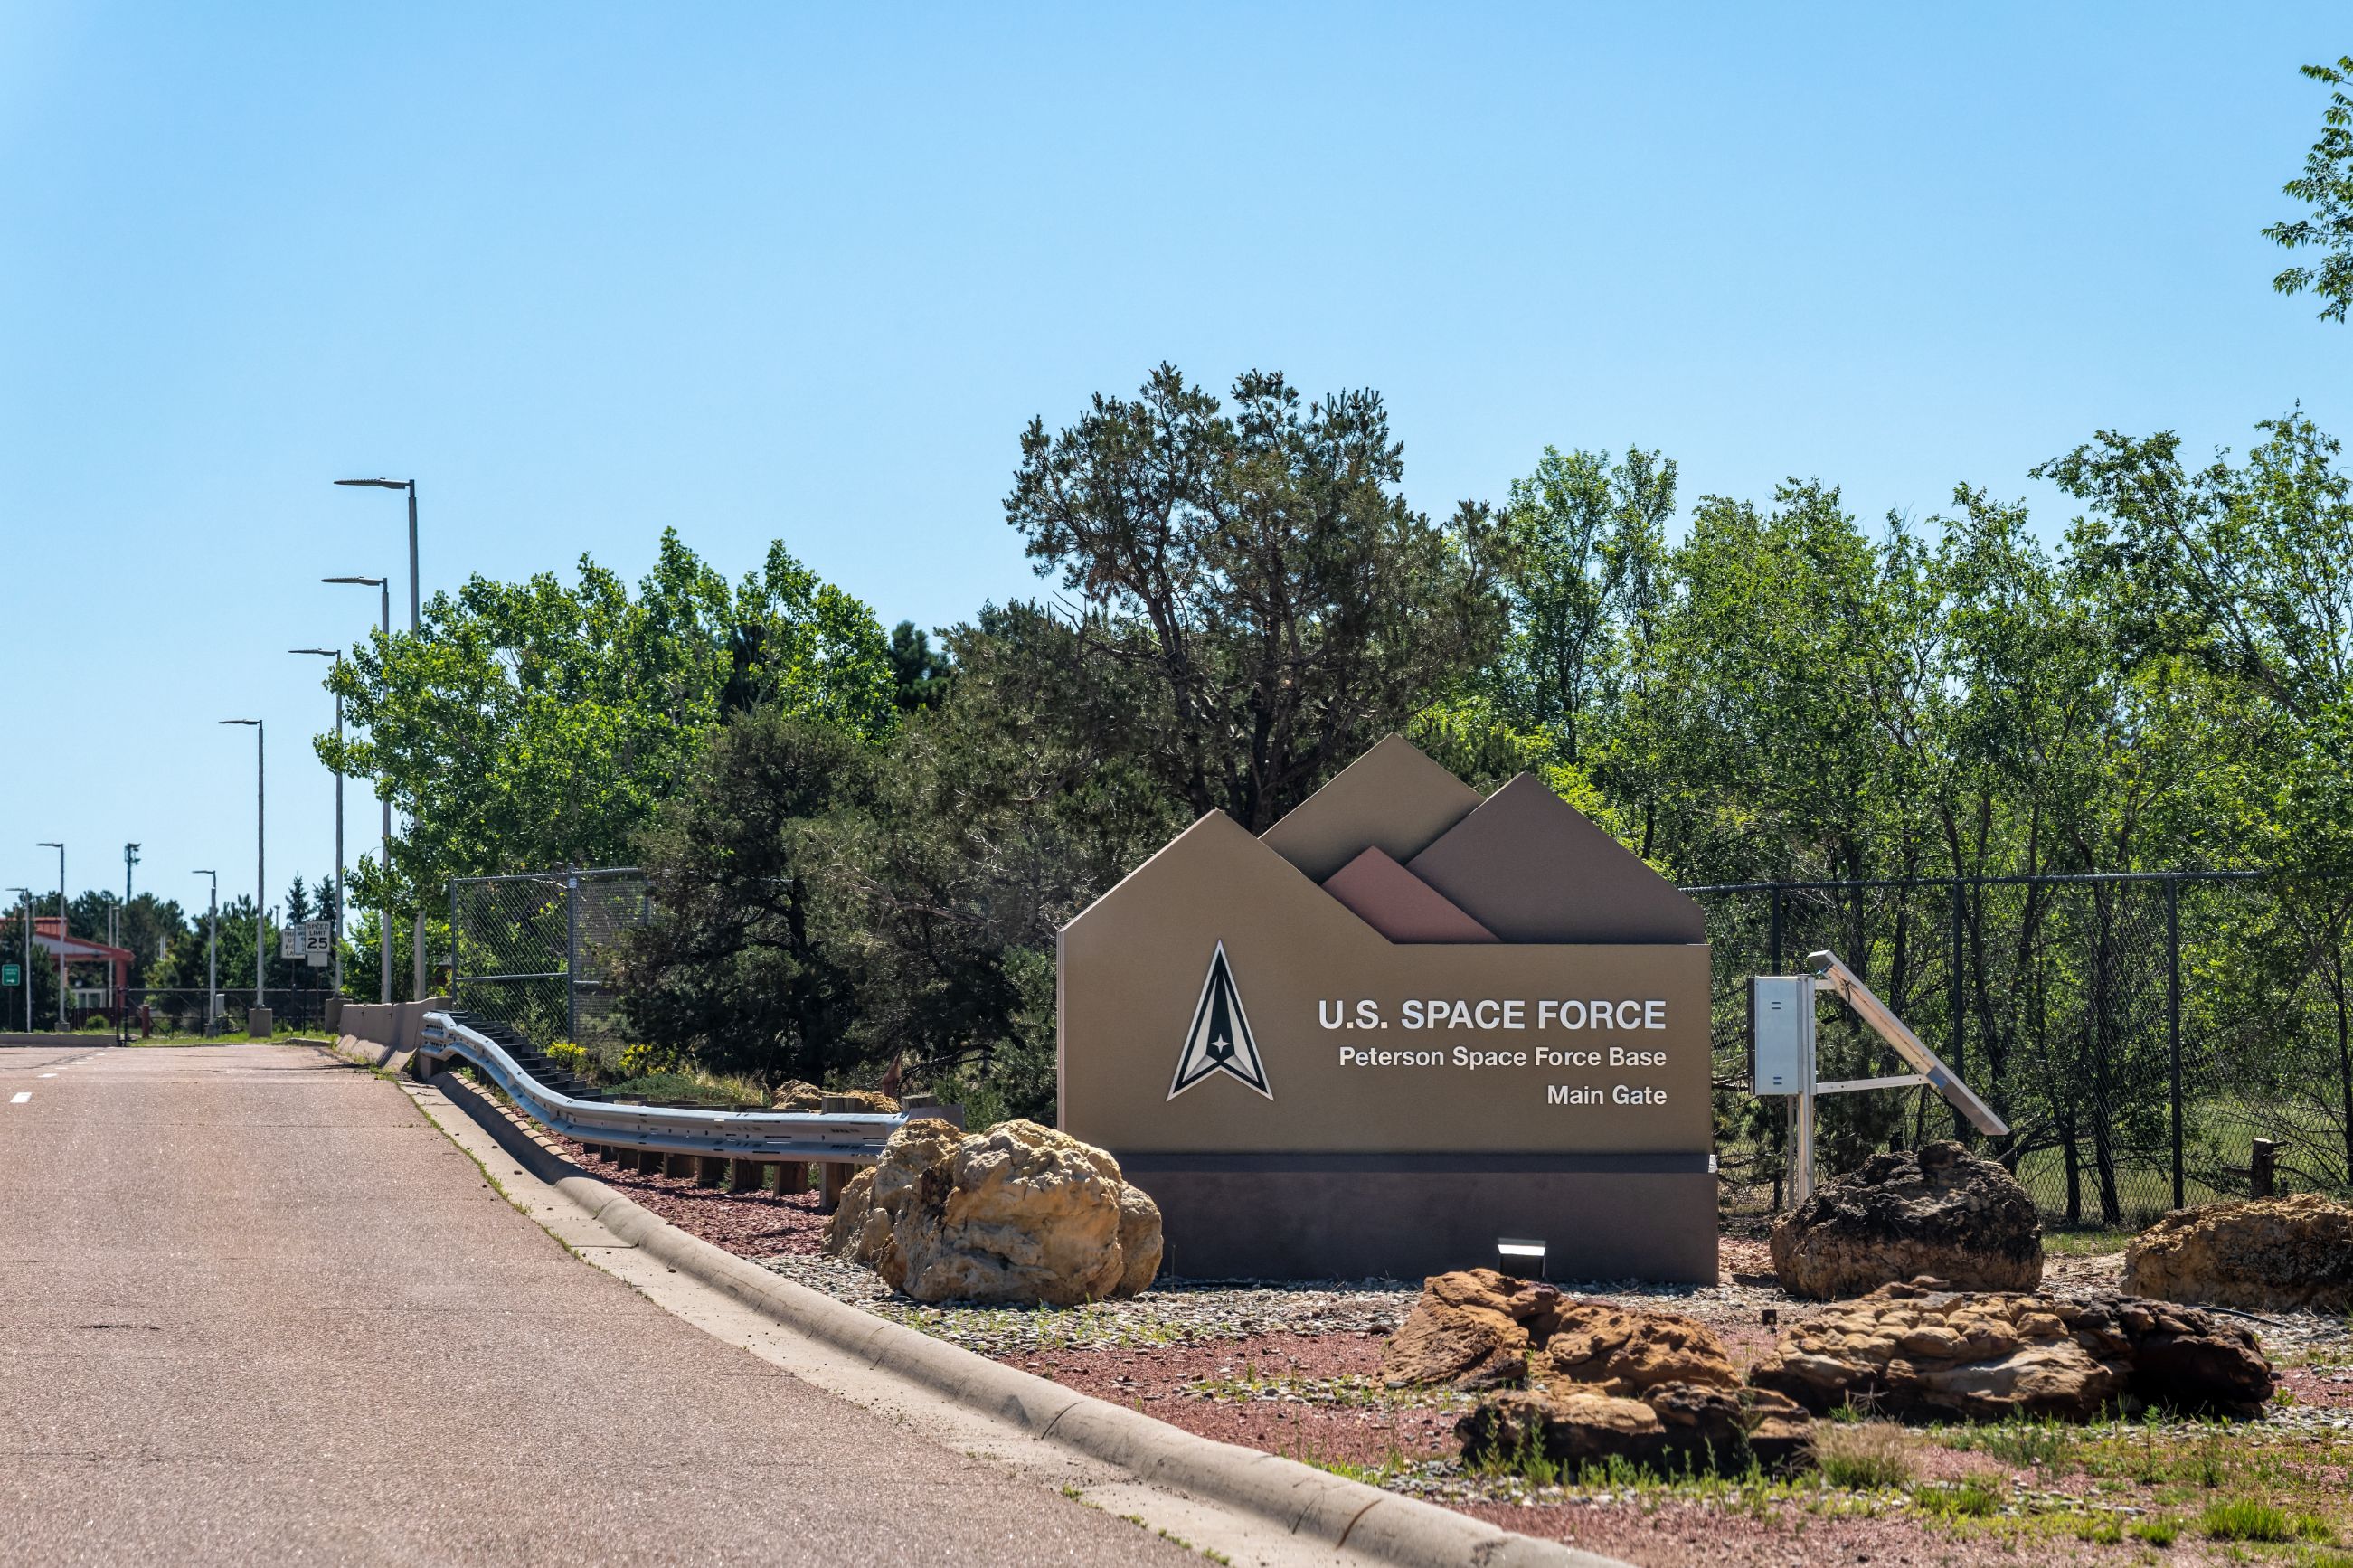 Colorado Springs, CO - July 8, 2022:U.S. Space Force Peterson Space Force Base Main Gate sign